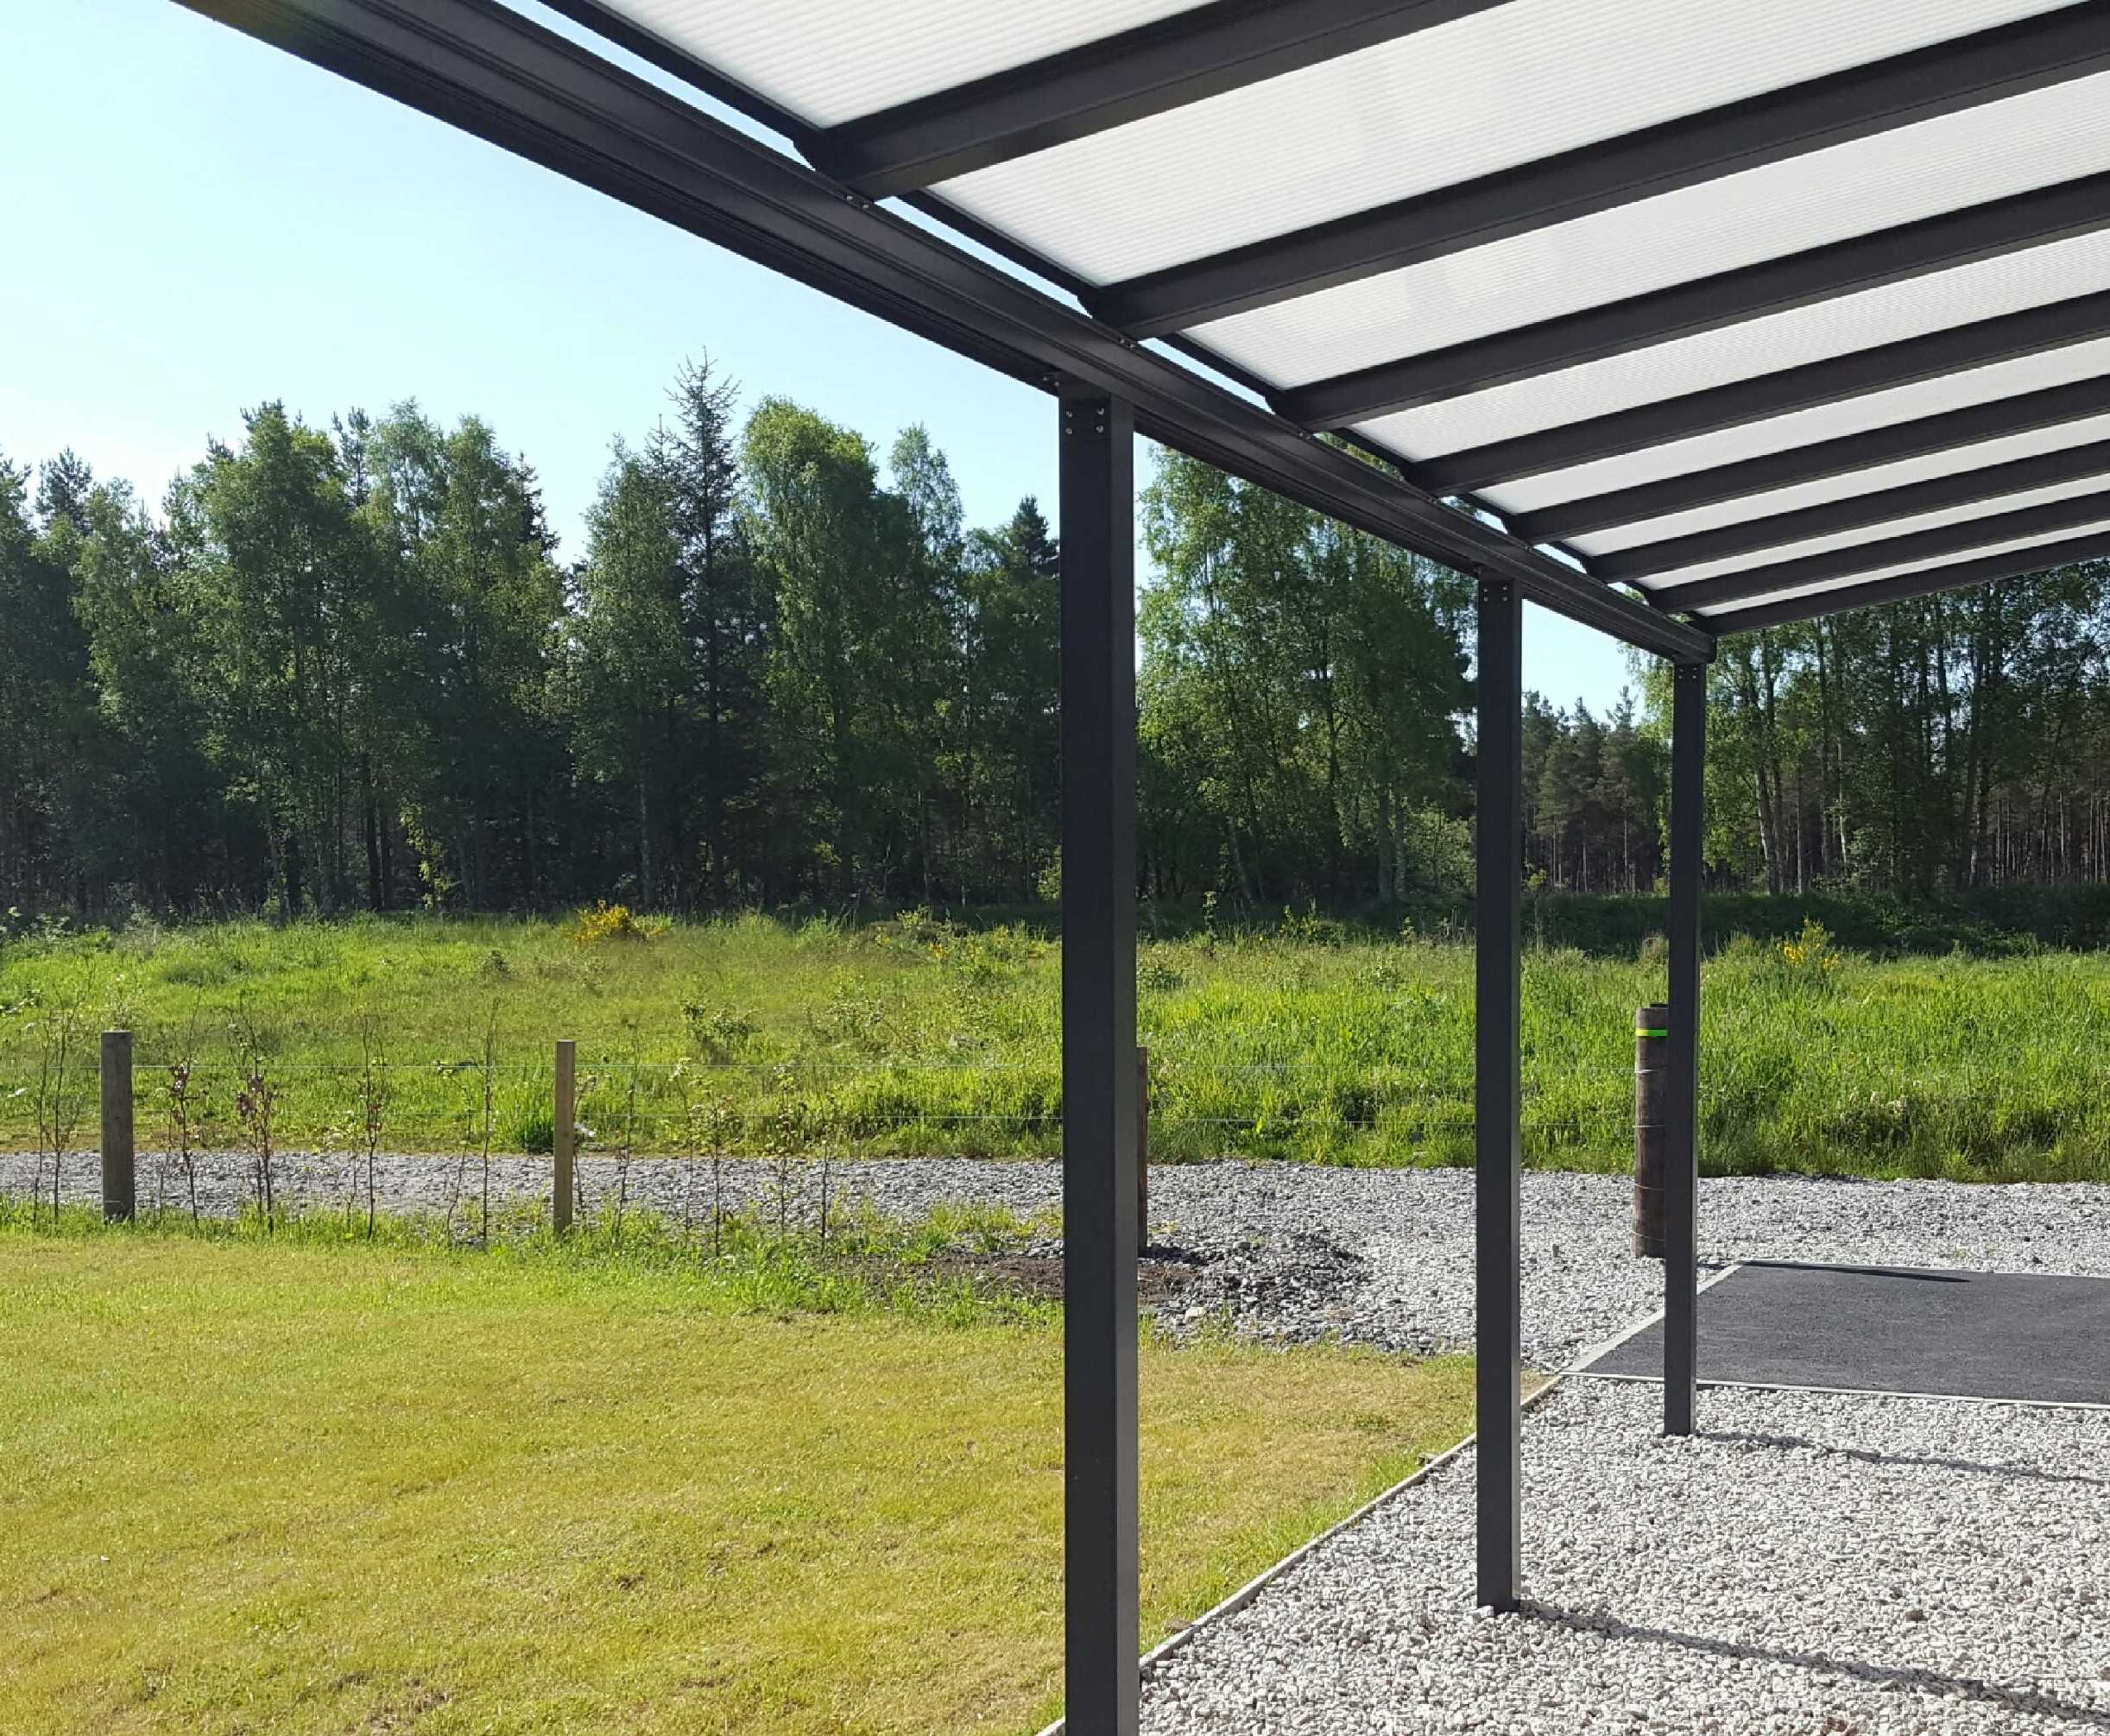 Omega Smart Lean-To Canopy, Anthracite Grey, UNGLAZED for 6mm Glazing - 9.8m (W) x 2.5m (P), (5) Supporting Posts